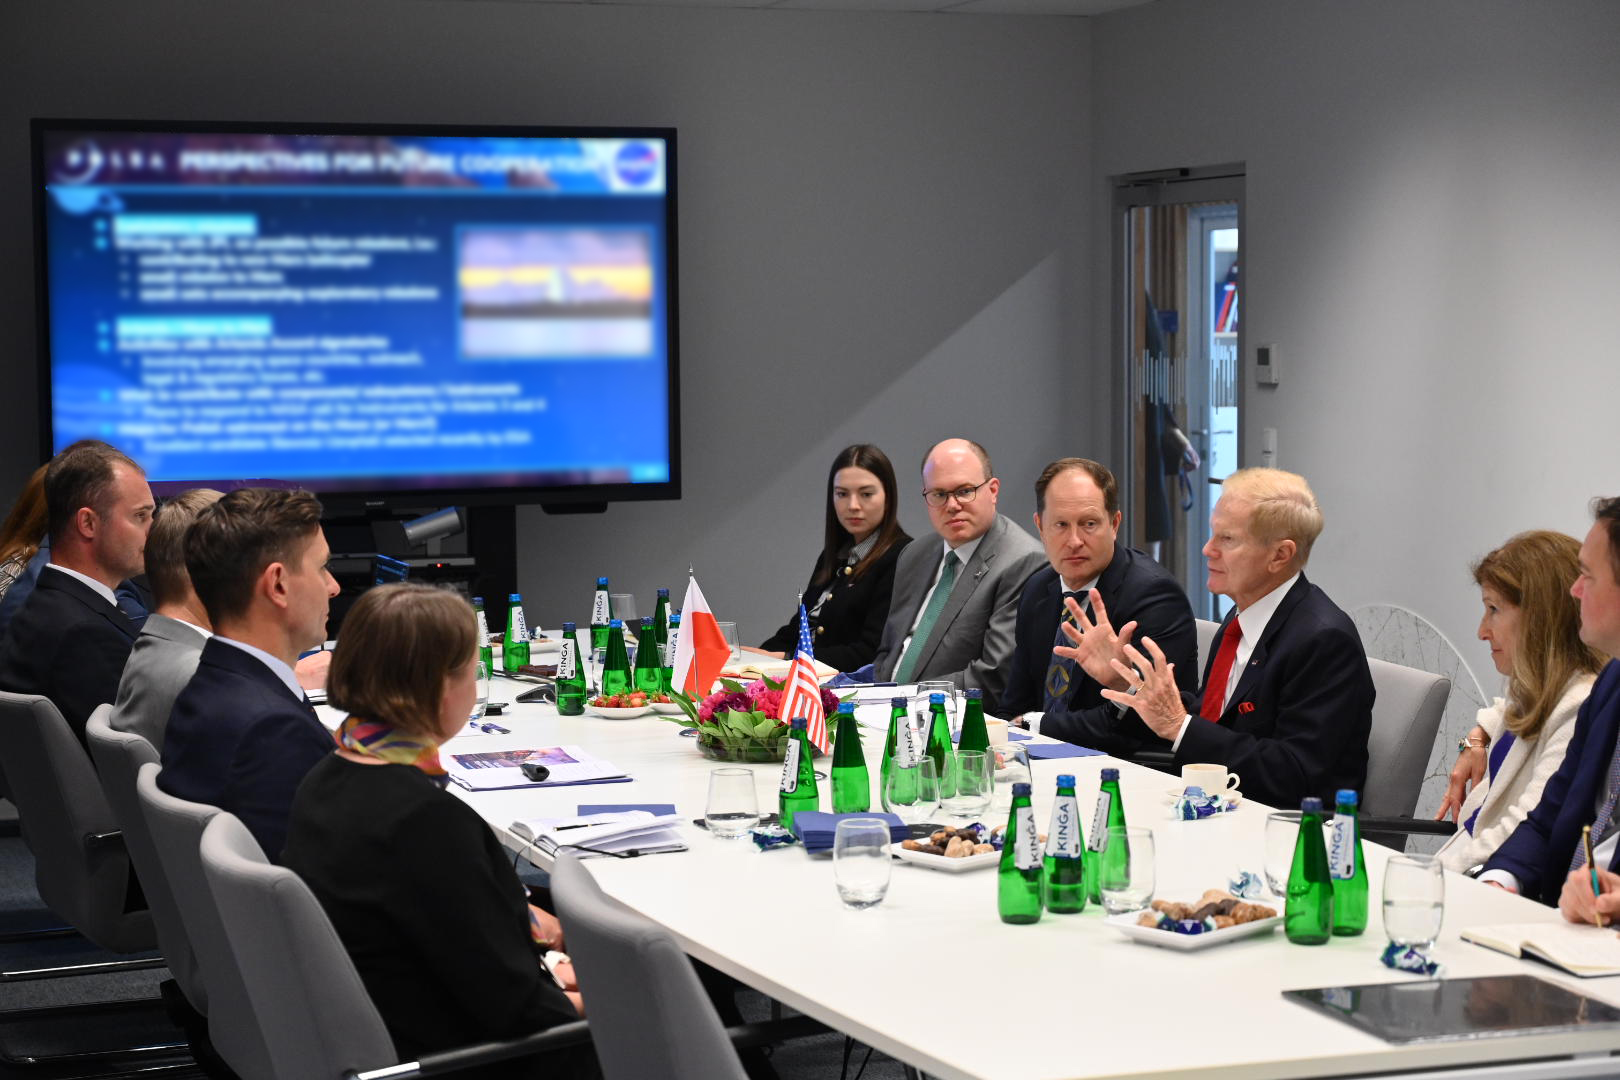 Visit of the head of NASA to the Polish Space Agency